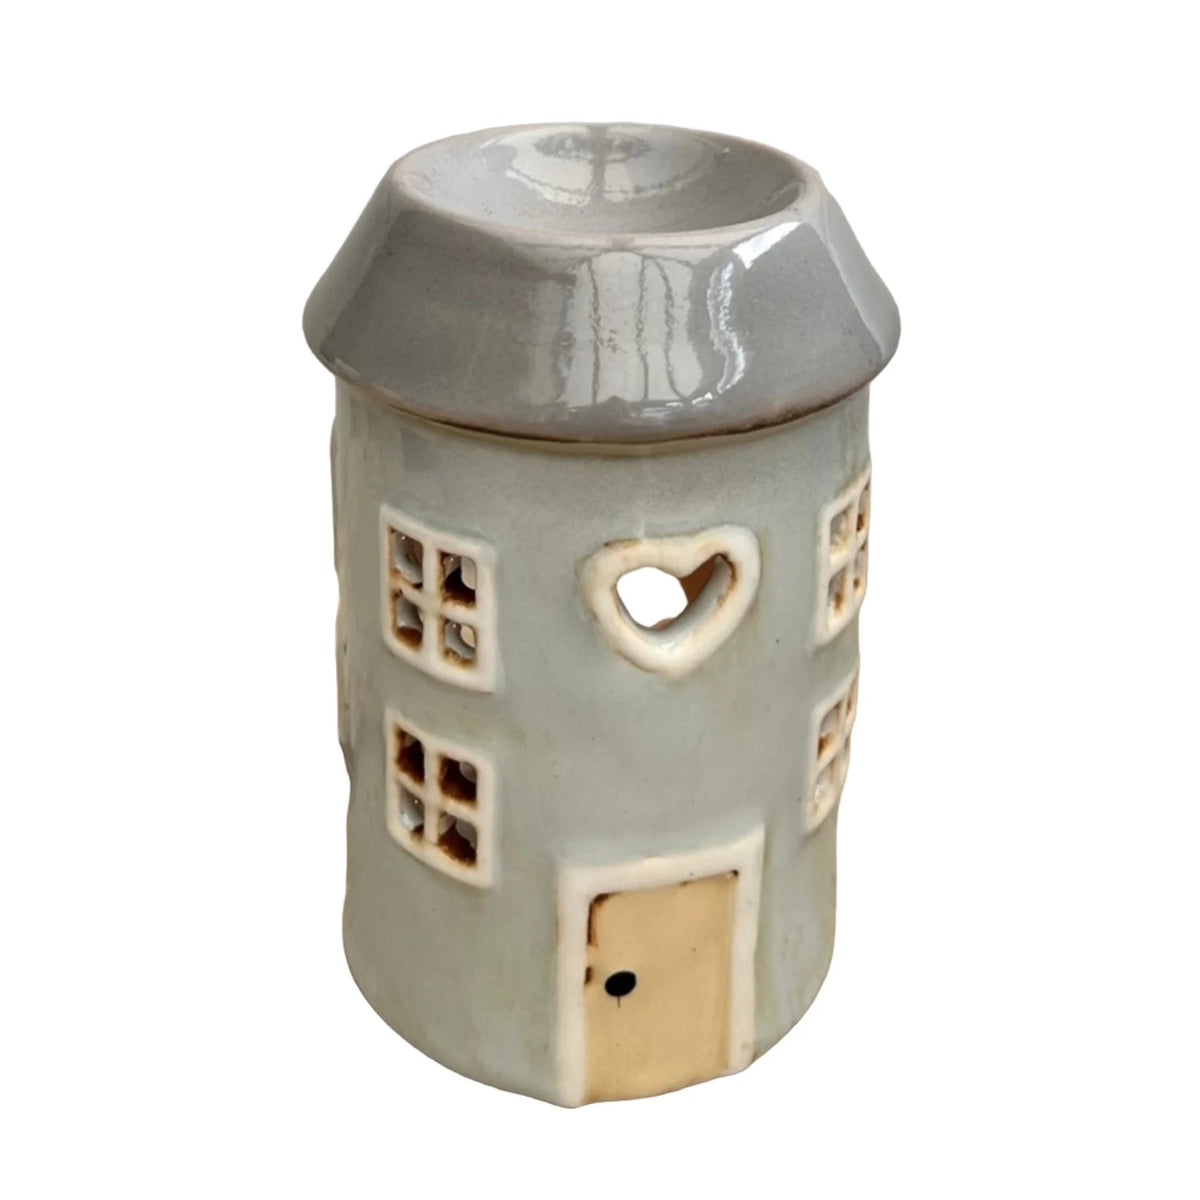 Pottery Style House Wax Melter - Grey